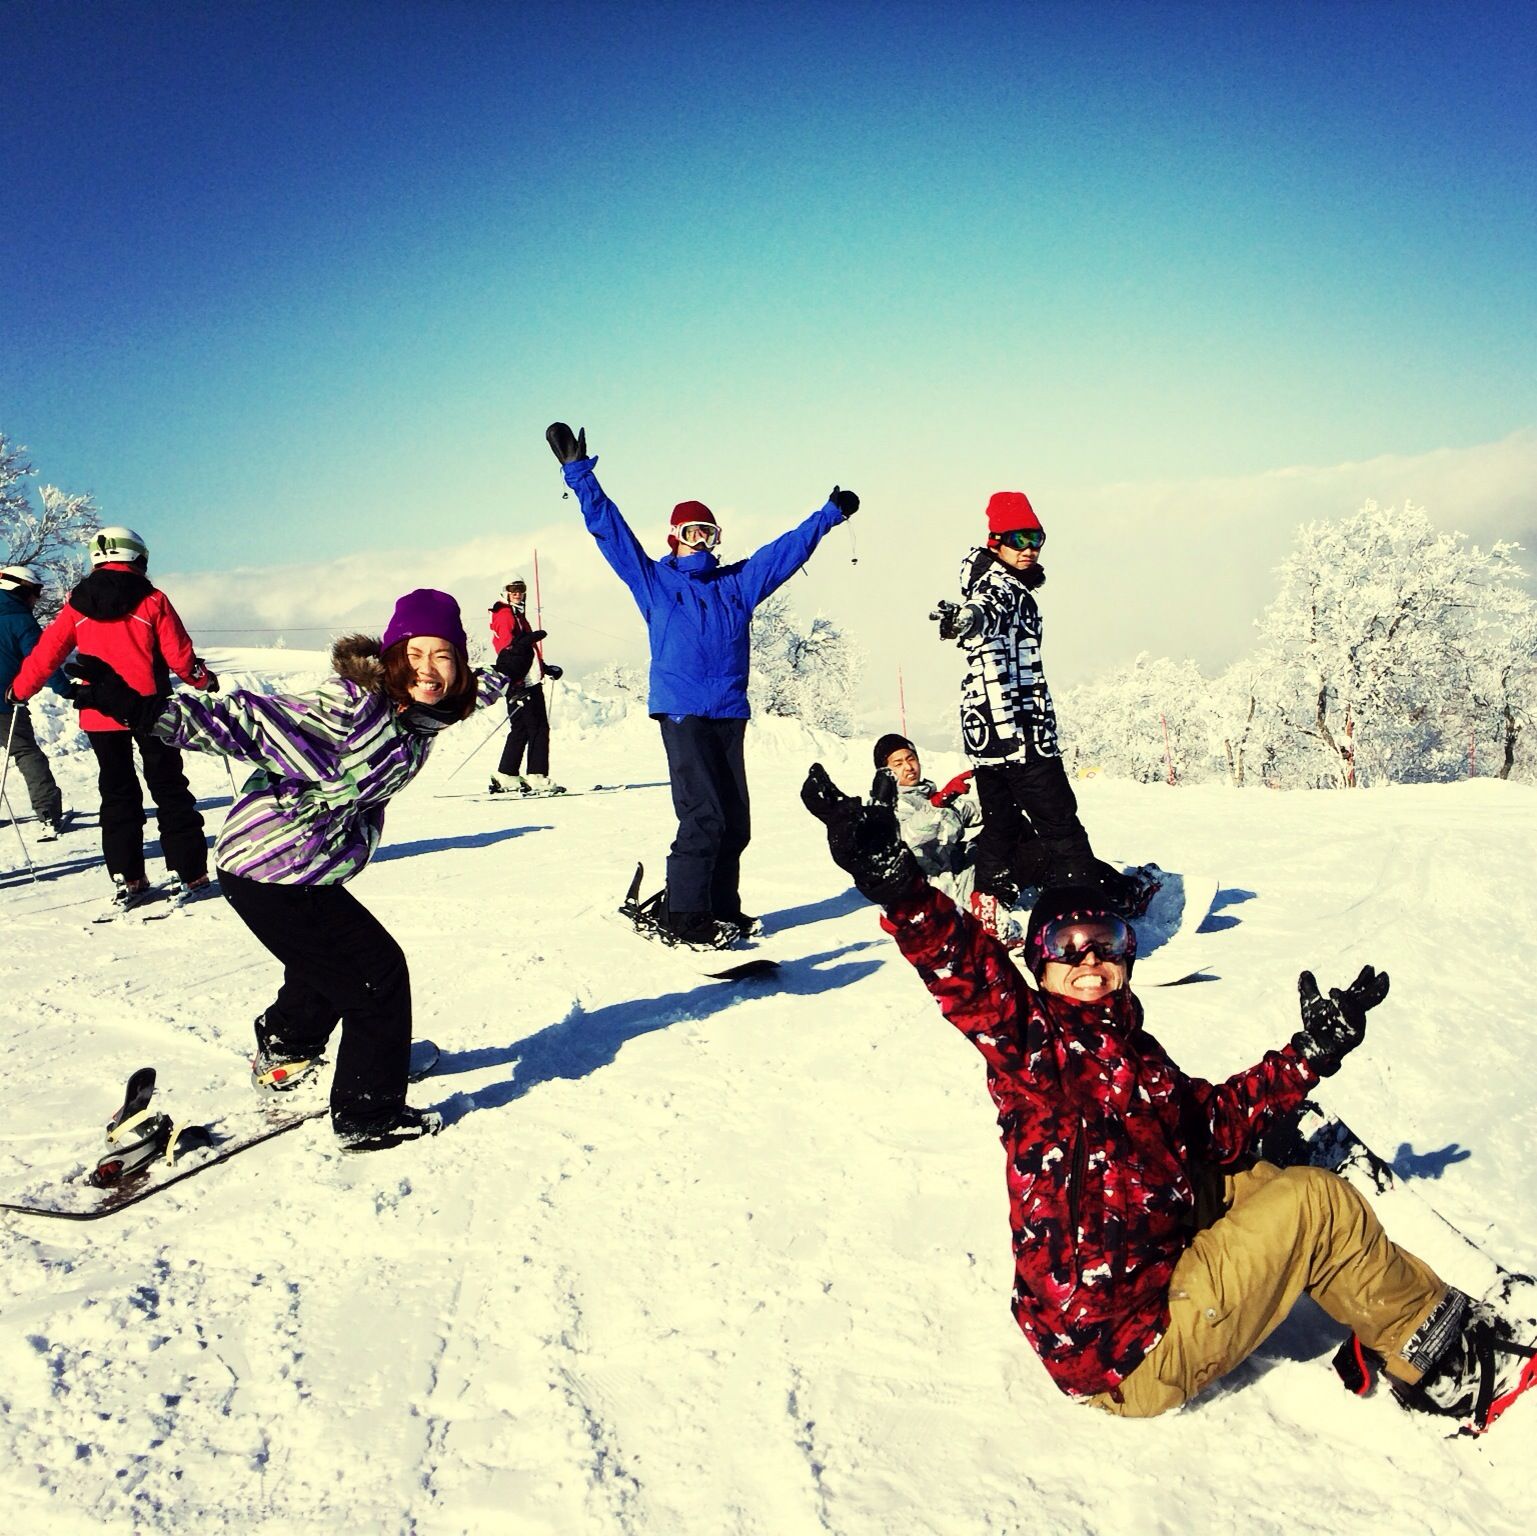 leisure activity, lifestyles, enjoyment, fun, full length, men, extreme sports, togetherness, vacations, skill, vitality, clear sky, winter sport, sport, excitement, winter, large group of people, snow, jumping